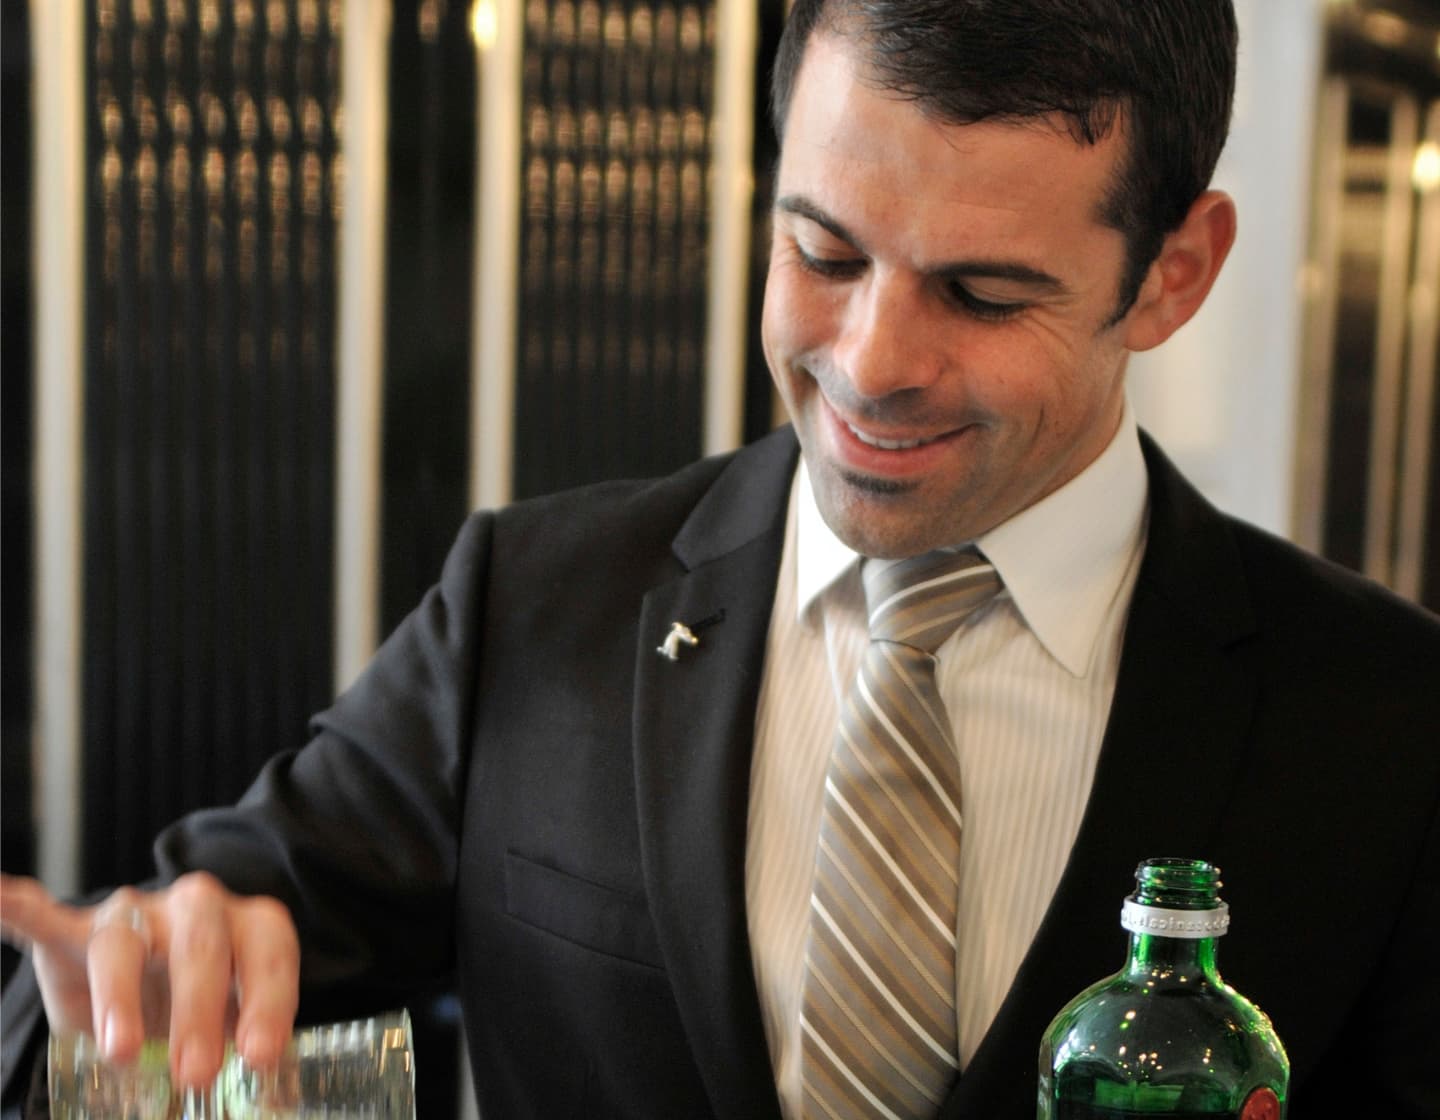 Ago Perrone in a suit measuring a cocktail